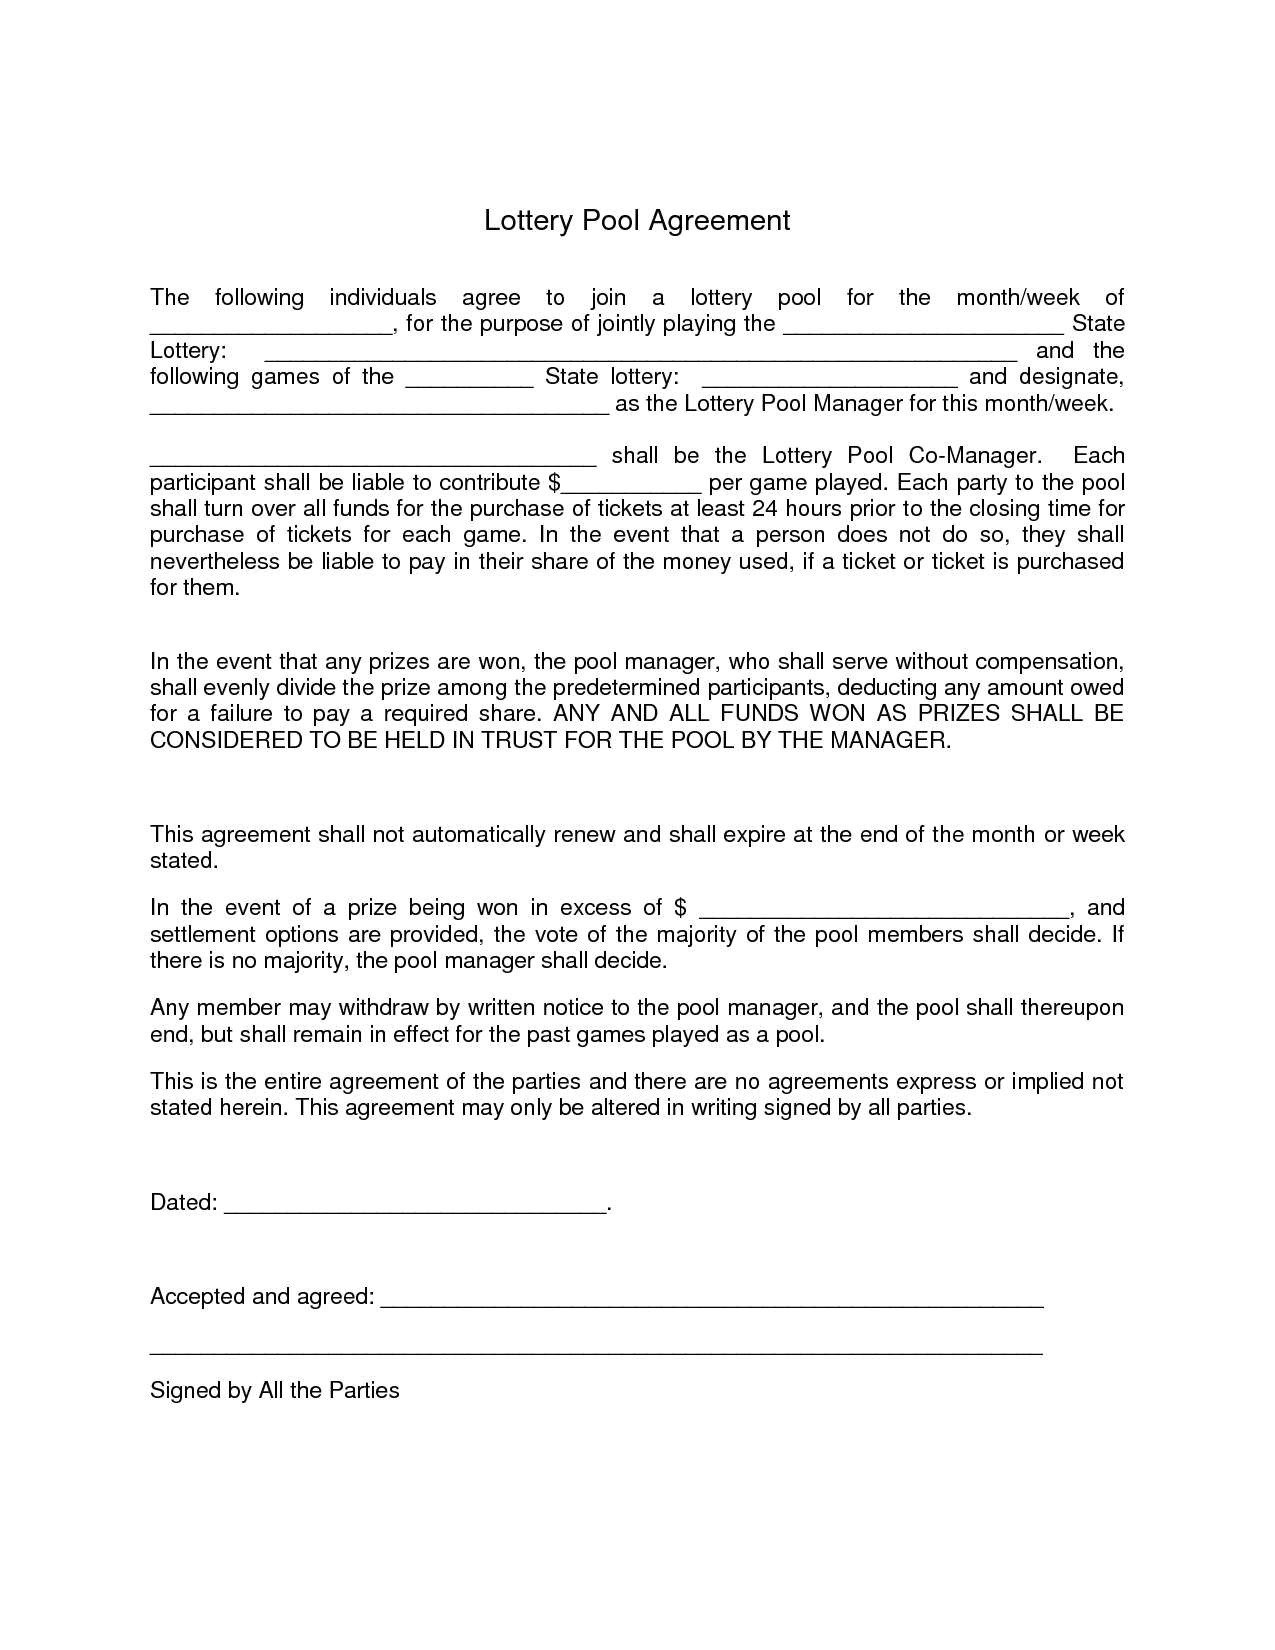 lottery agreement form free simple fice lottery pool contract template ra d60706